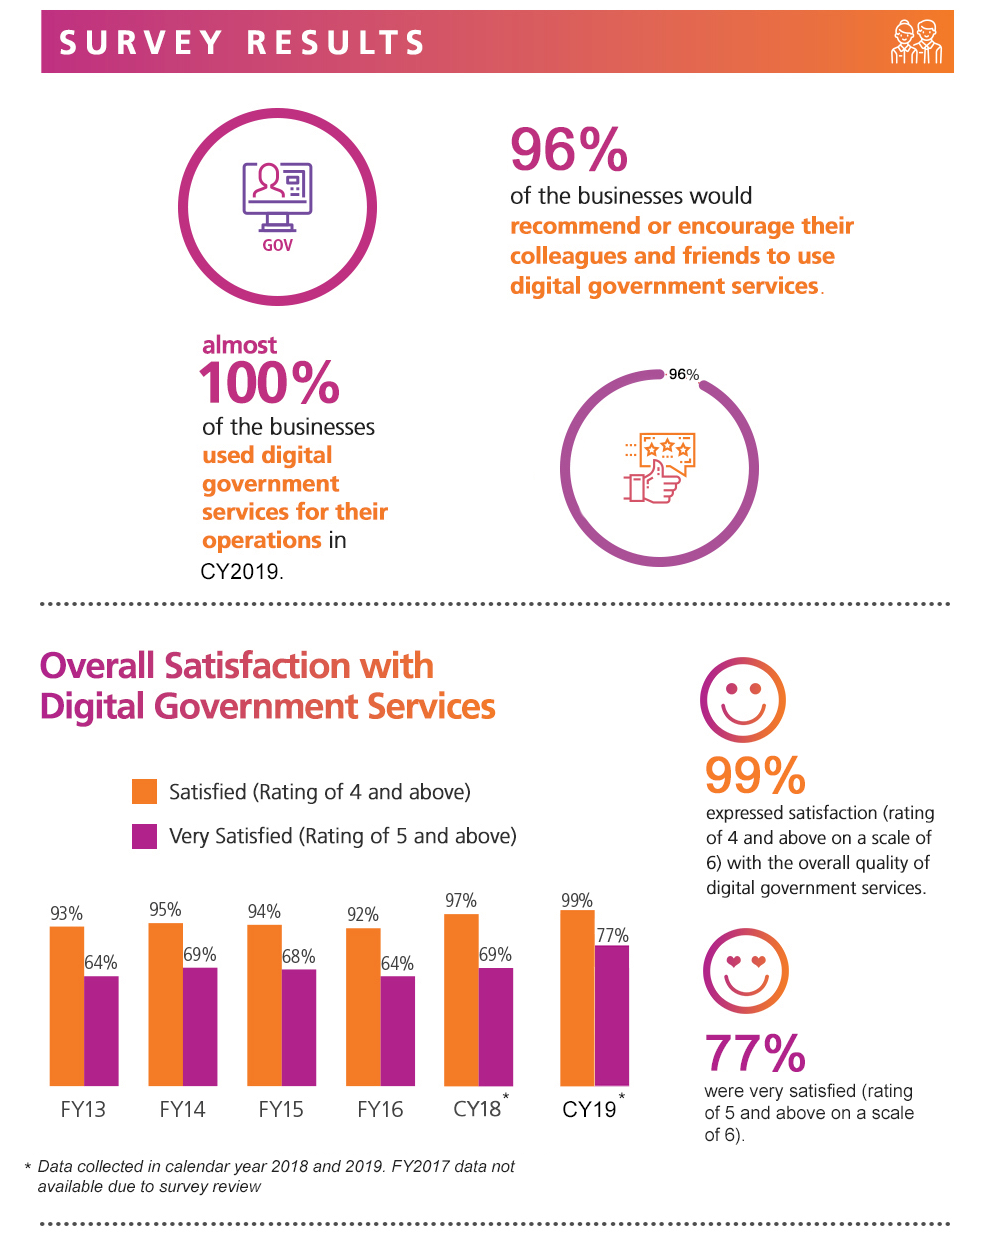 Digital Government Perception Survey 2019 for Business by GovTech